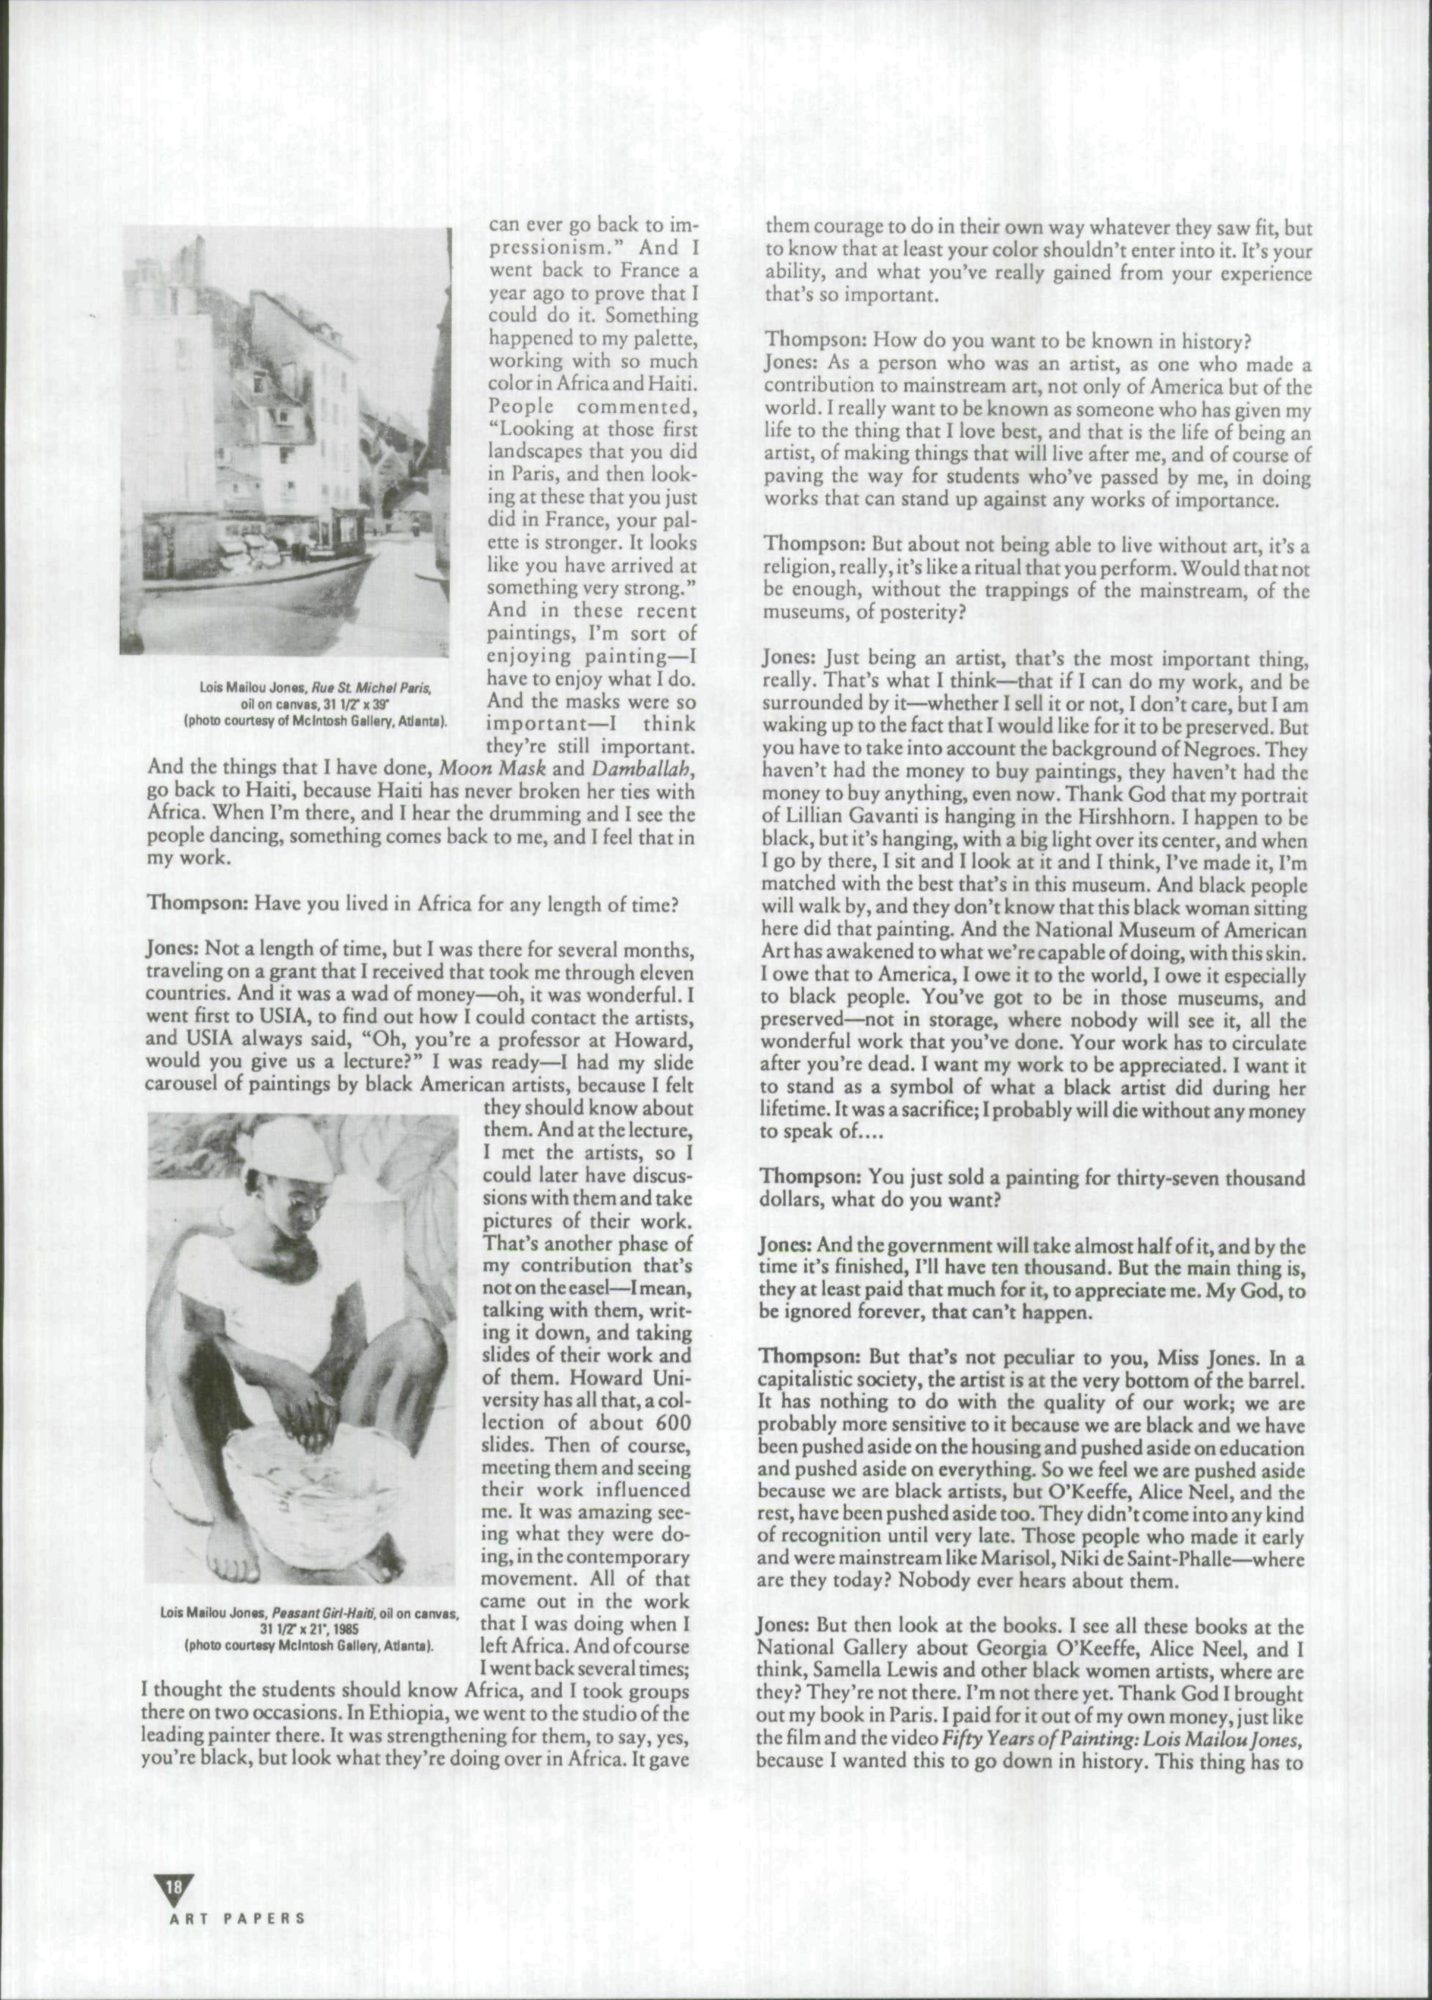 A scan of an interview between Mildred Thompson and Lois Mailou Jones